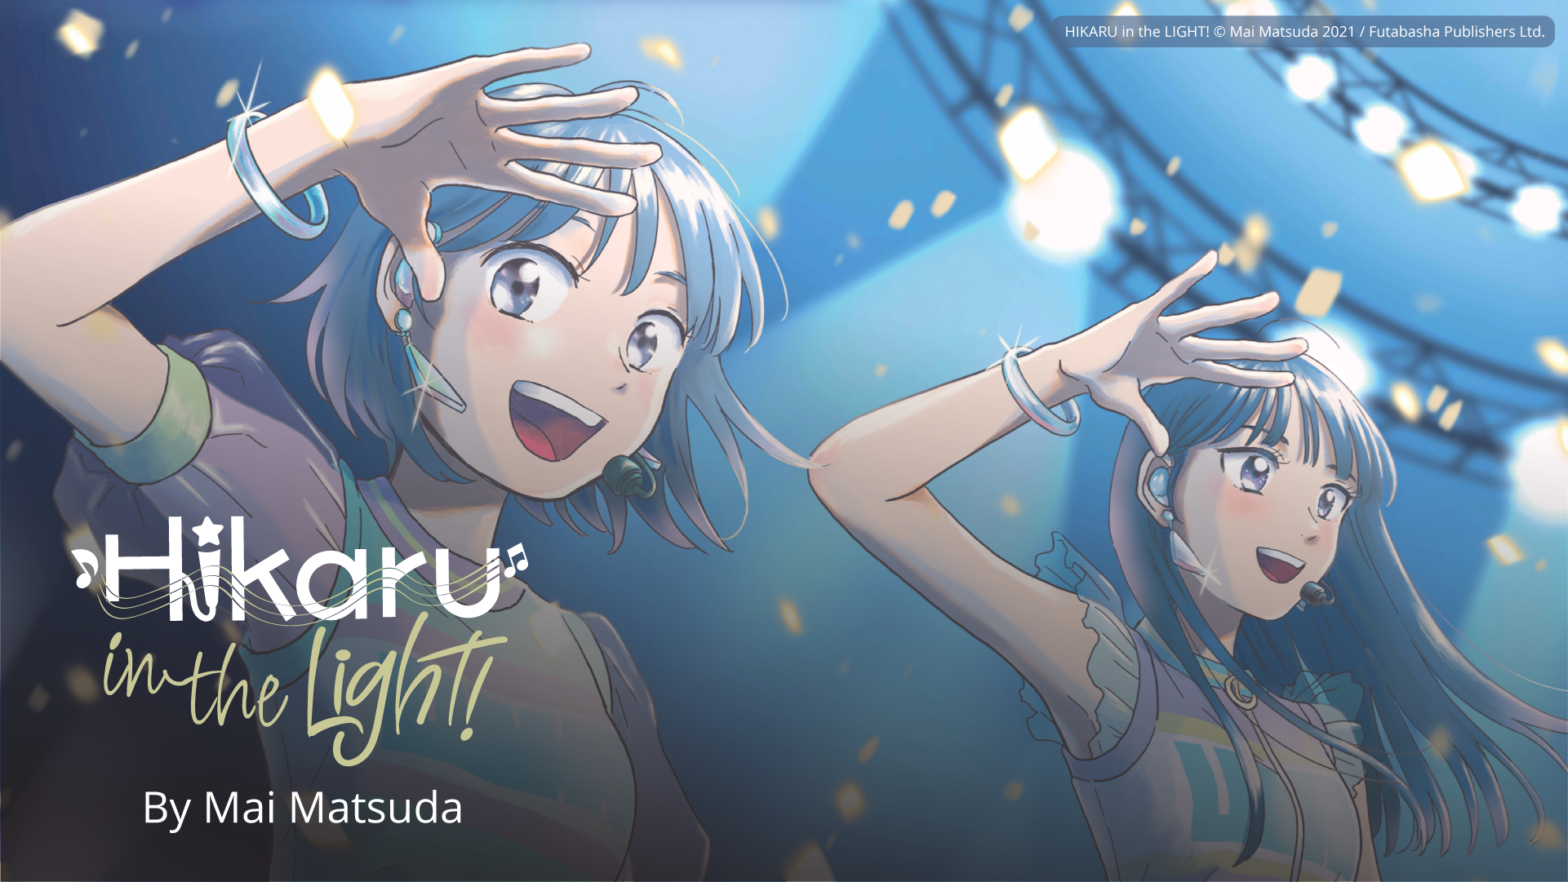 Two girls singing and smiling on stage. Hikaru in the Light by Mai Matsuda.